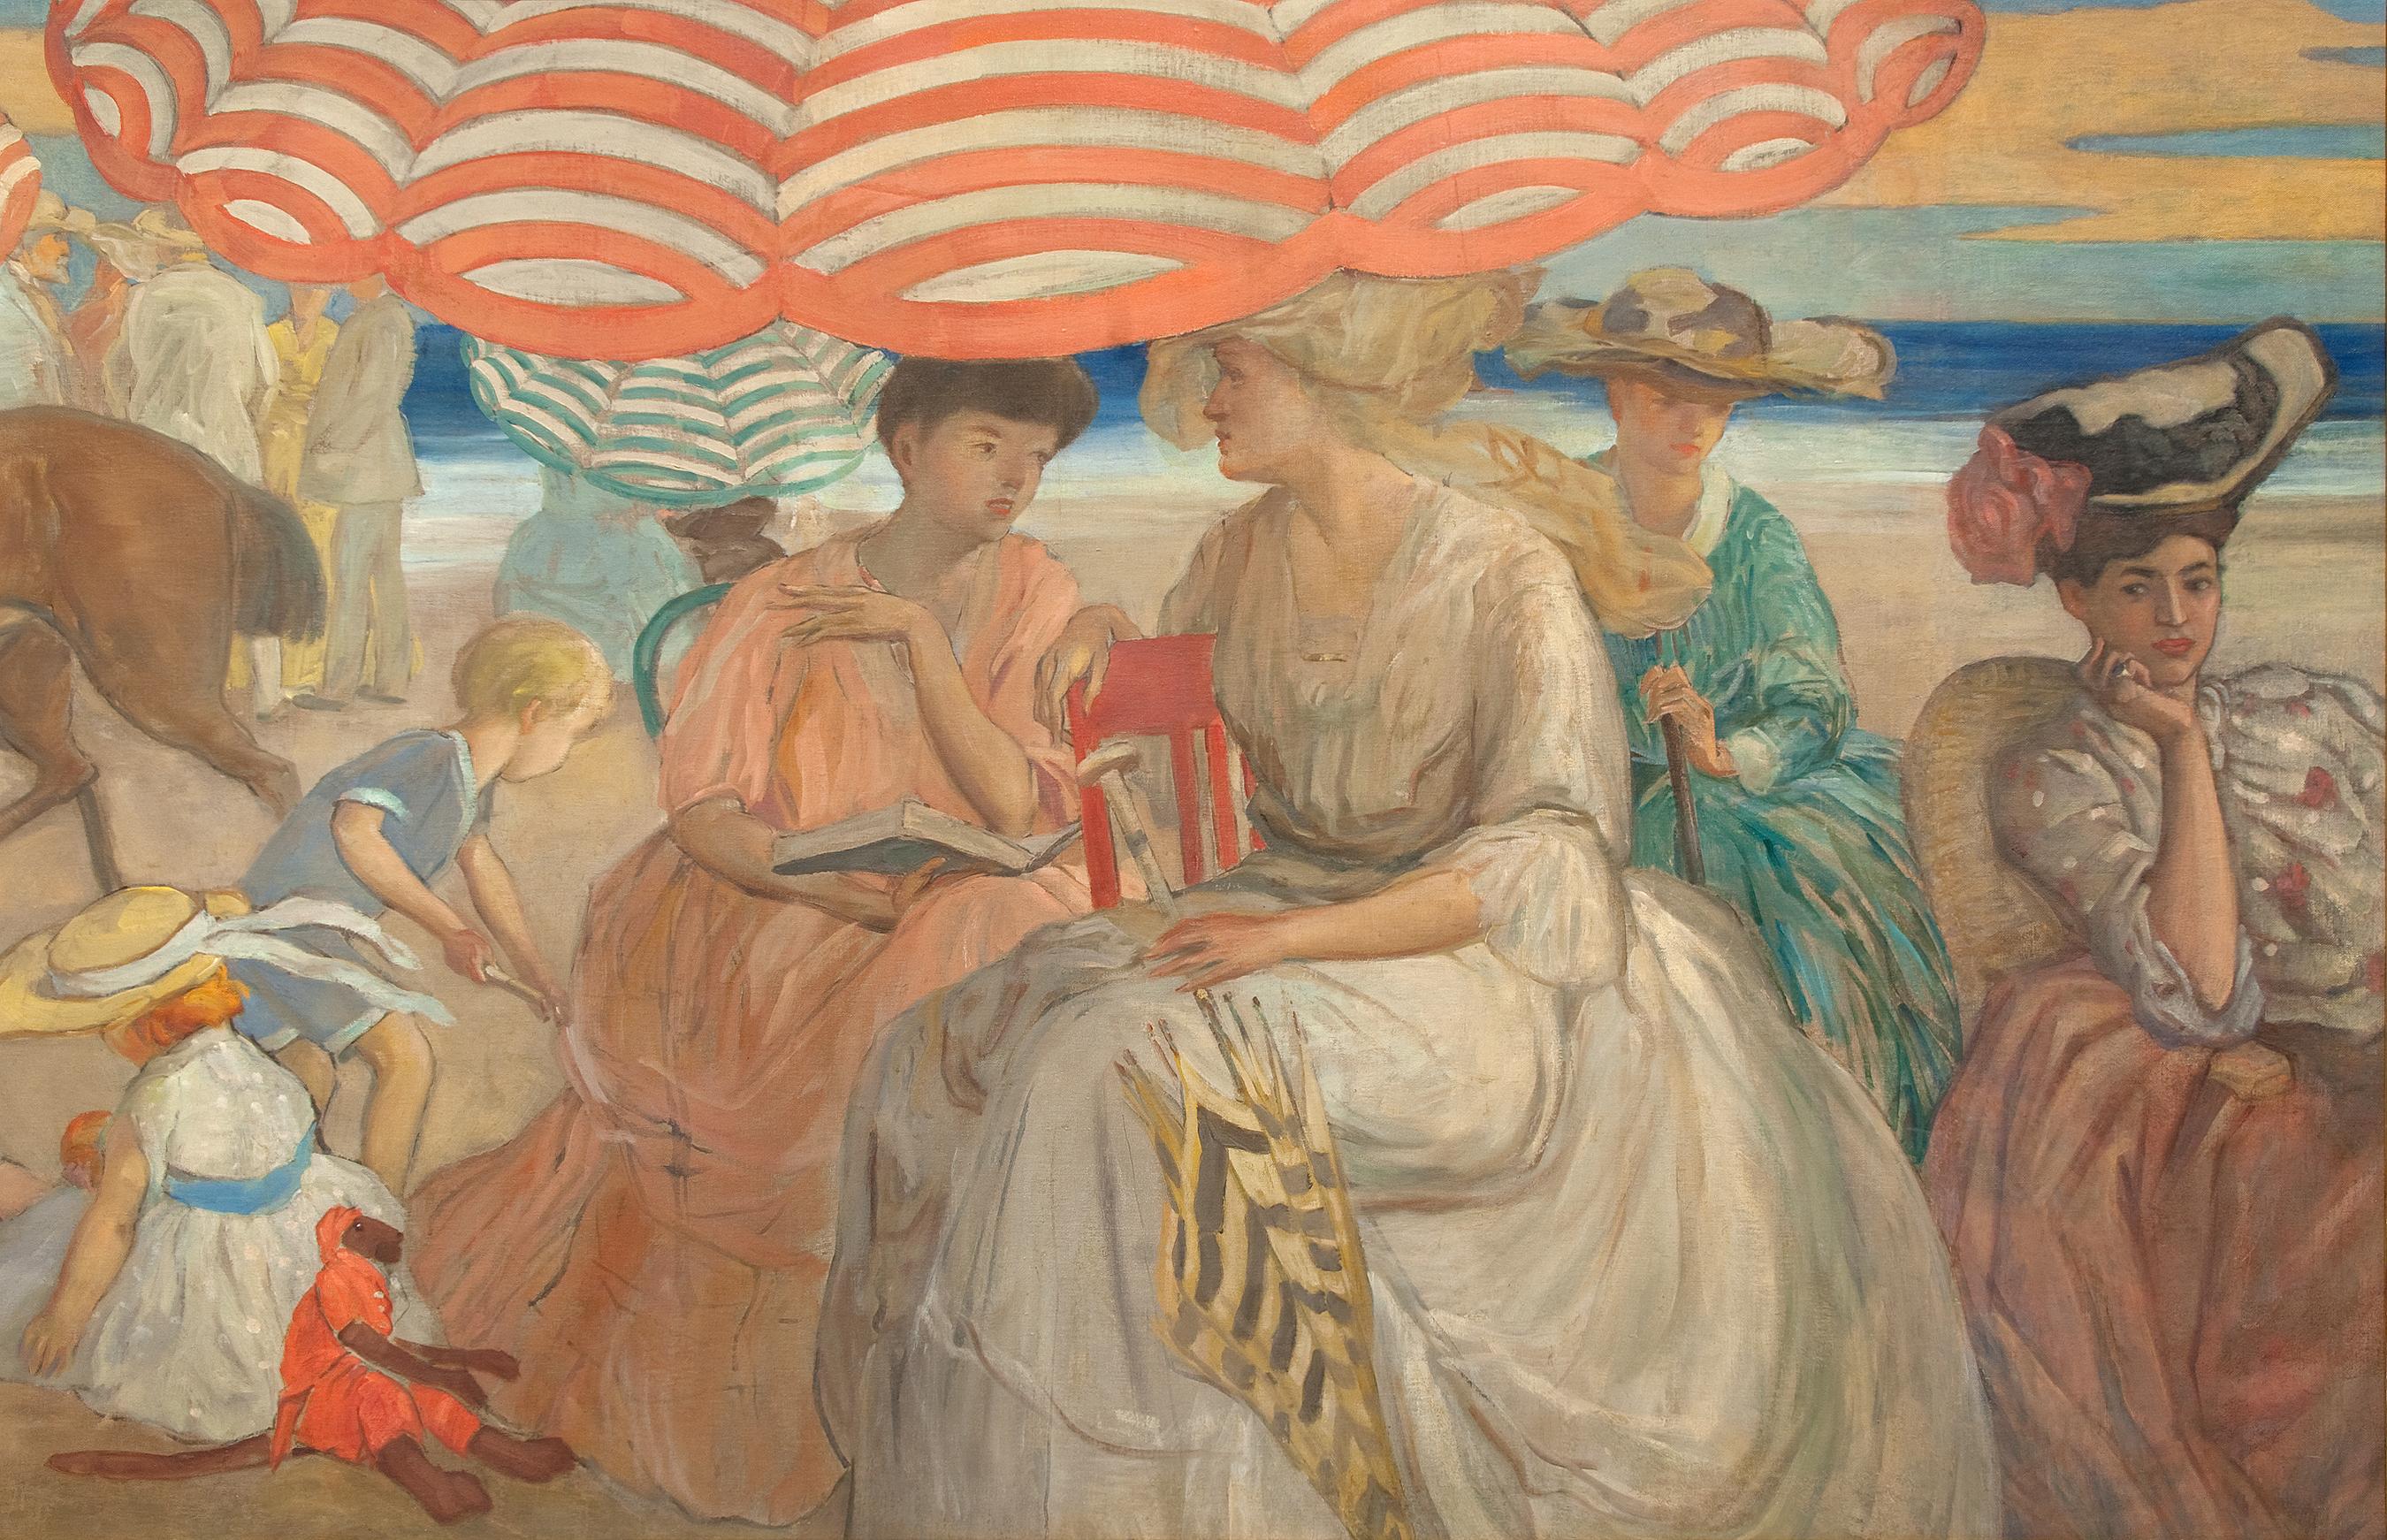 Under the Striped Umbrella - American Impressionist Painting by Frederick Carl Frieseke